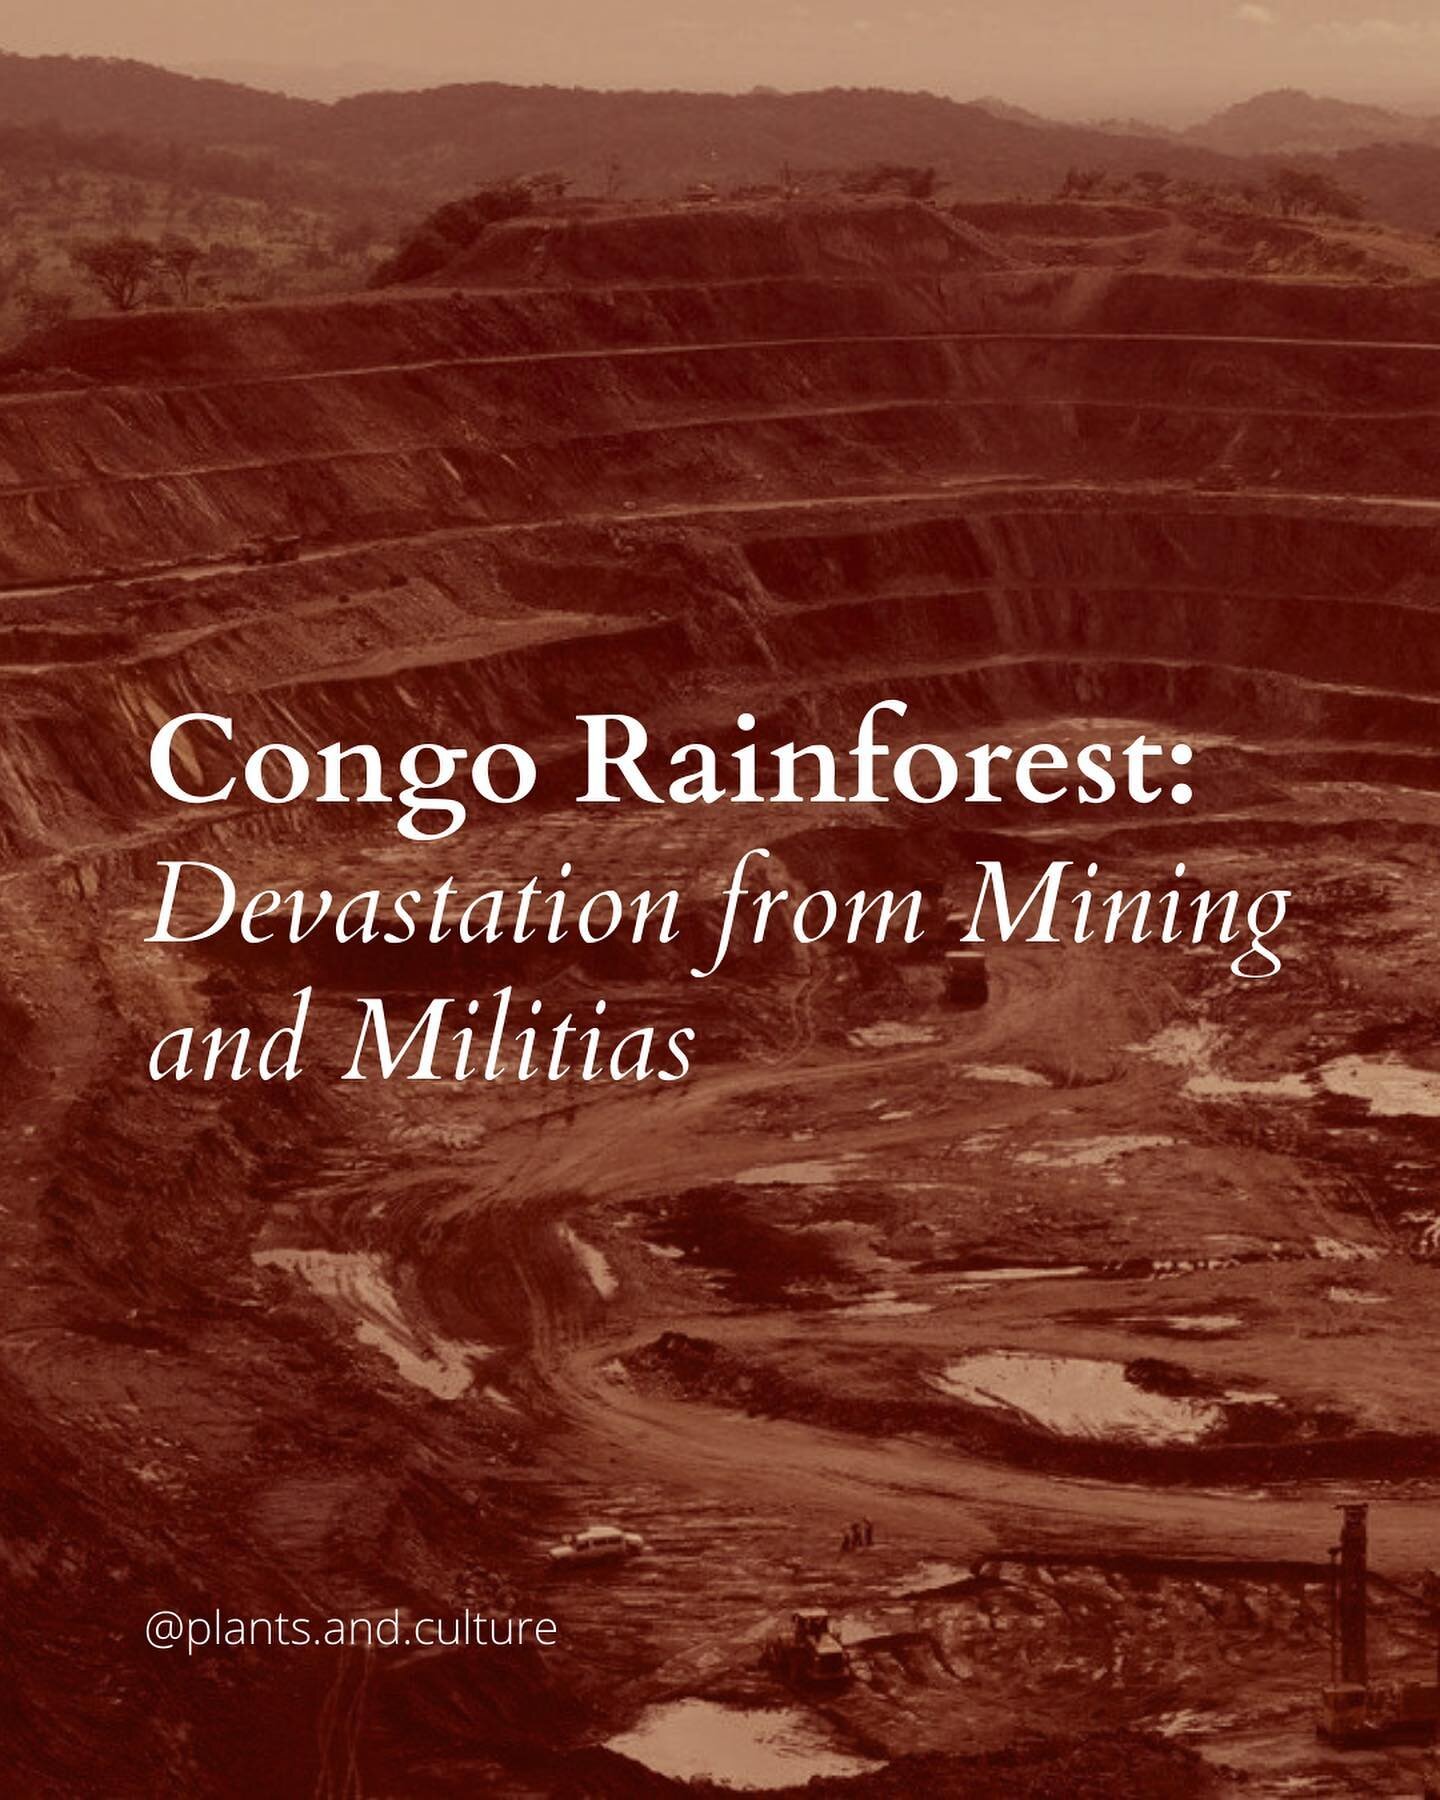 &ldquo;The world&rsquo;s economies, new technologies and climate change all are increasing demand for the rare minerals in the eastern Congo &mdash; and the world is letting criminal organisms steal and sell these minerals by brutalizing my people.&r